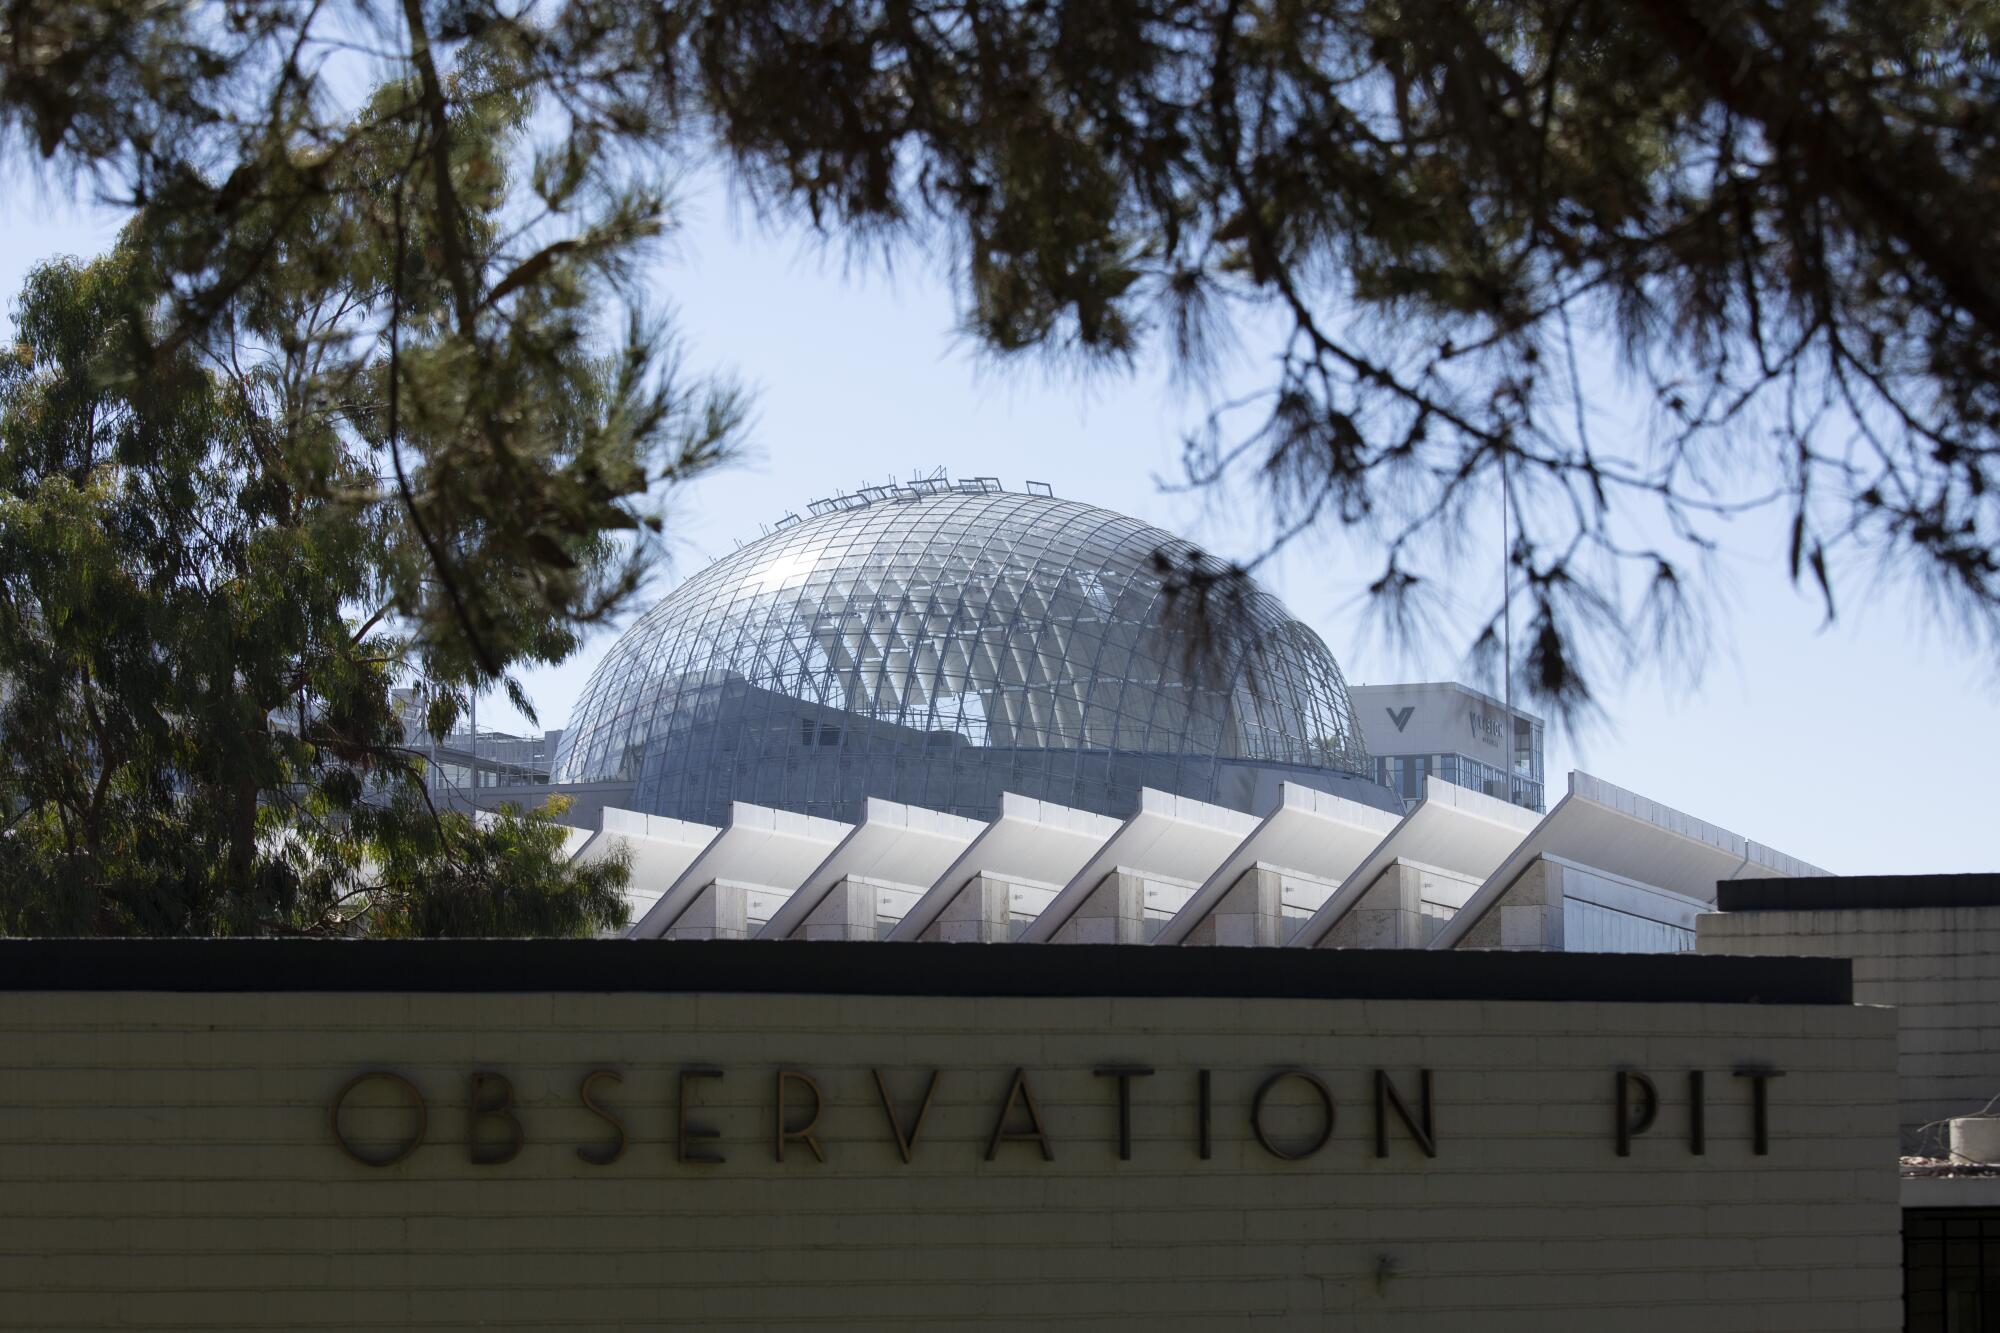 The spherical shape of the Geffen Theater pokes out above the roofs of a Tar Pits observation building and BCAM